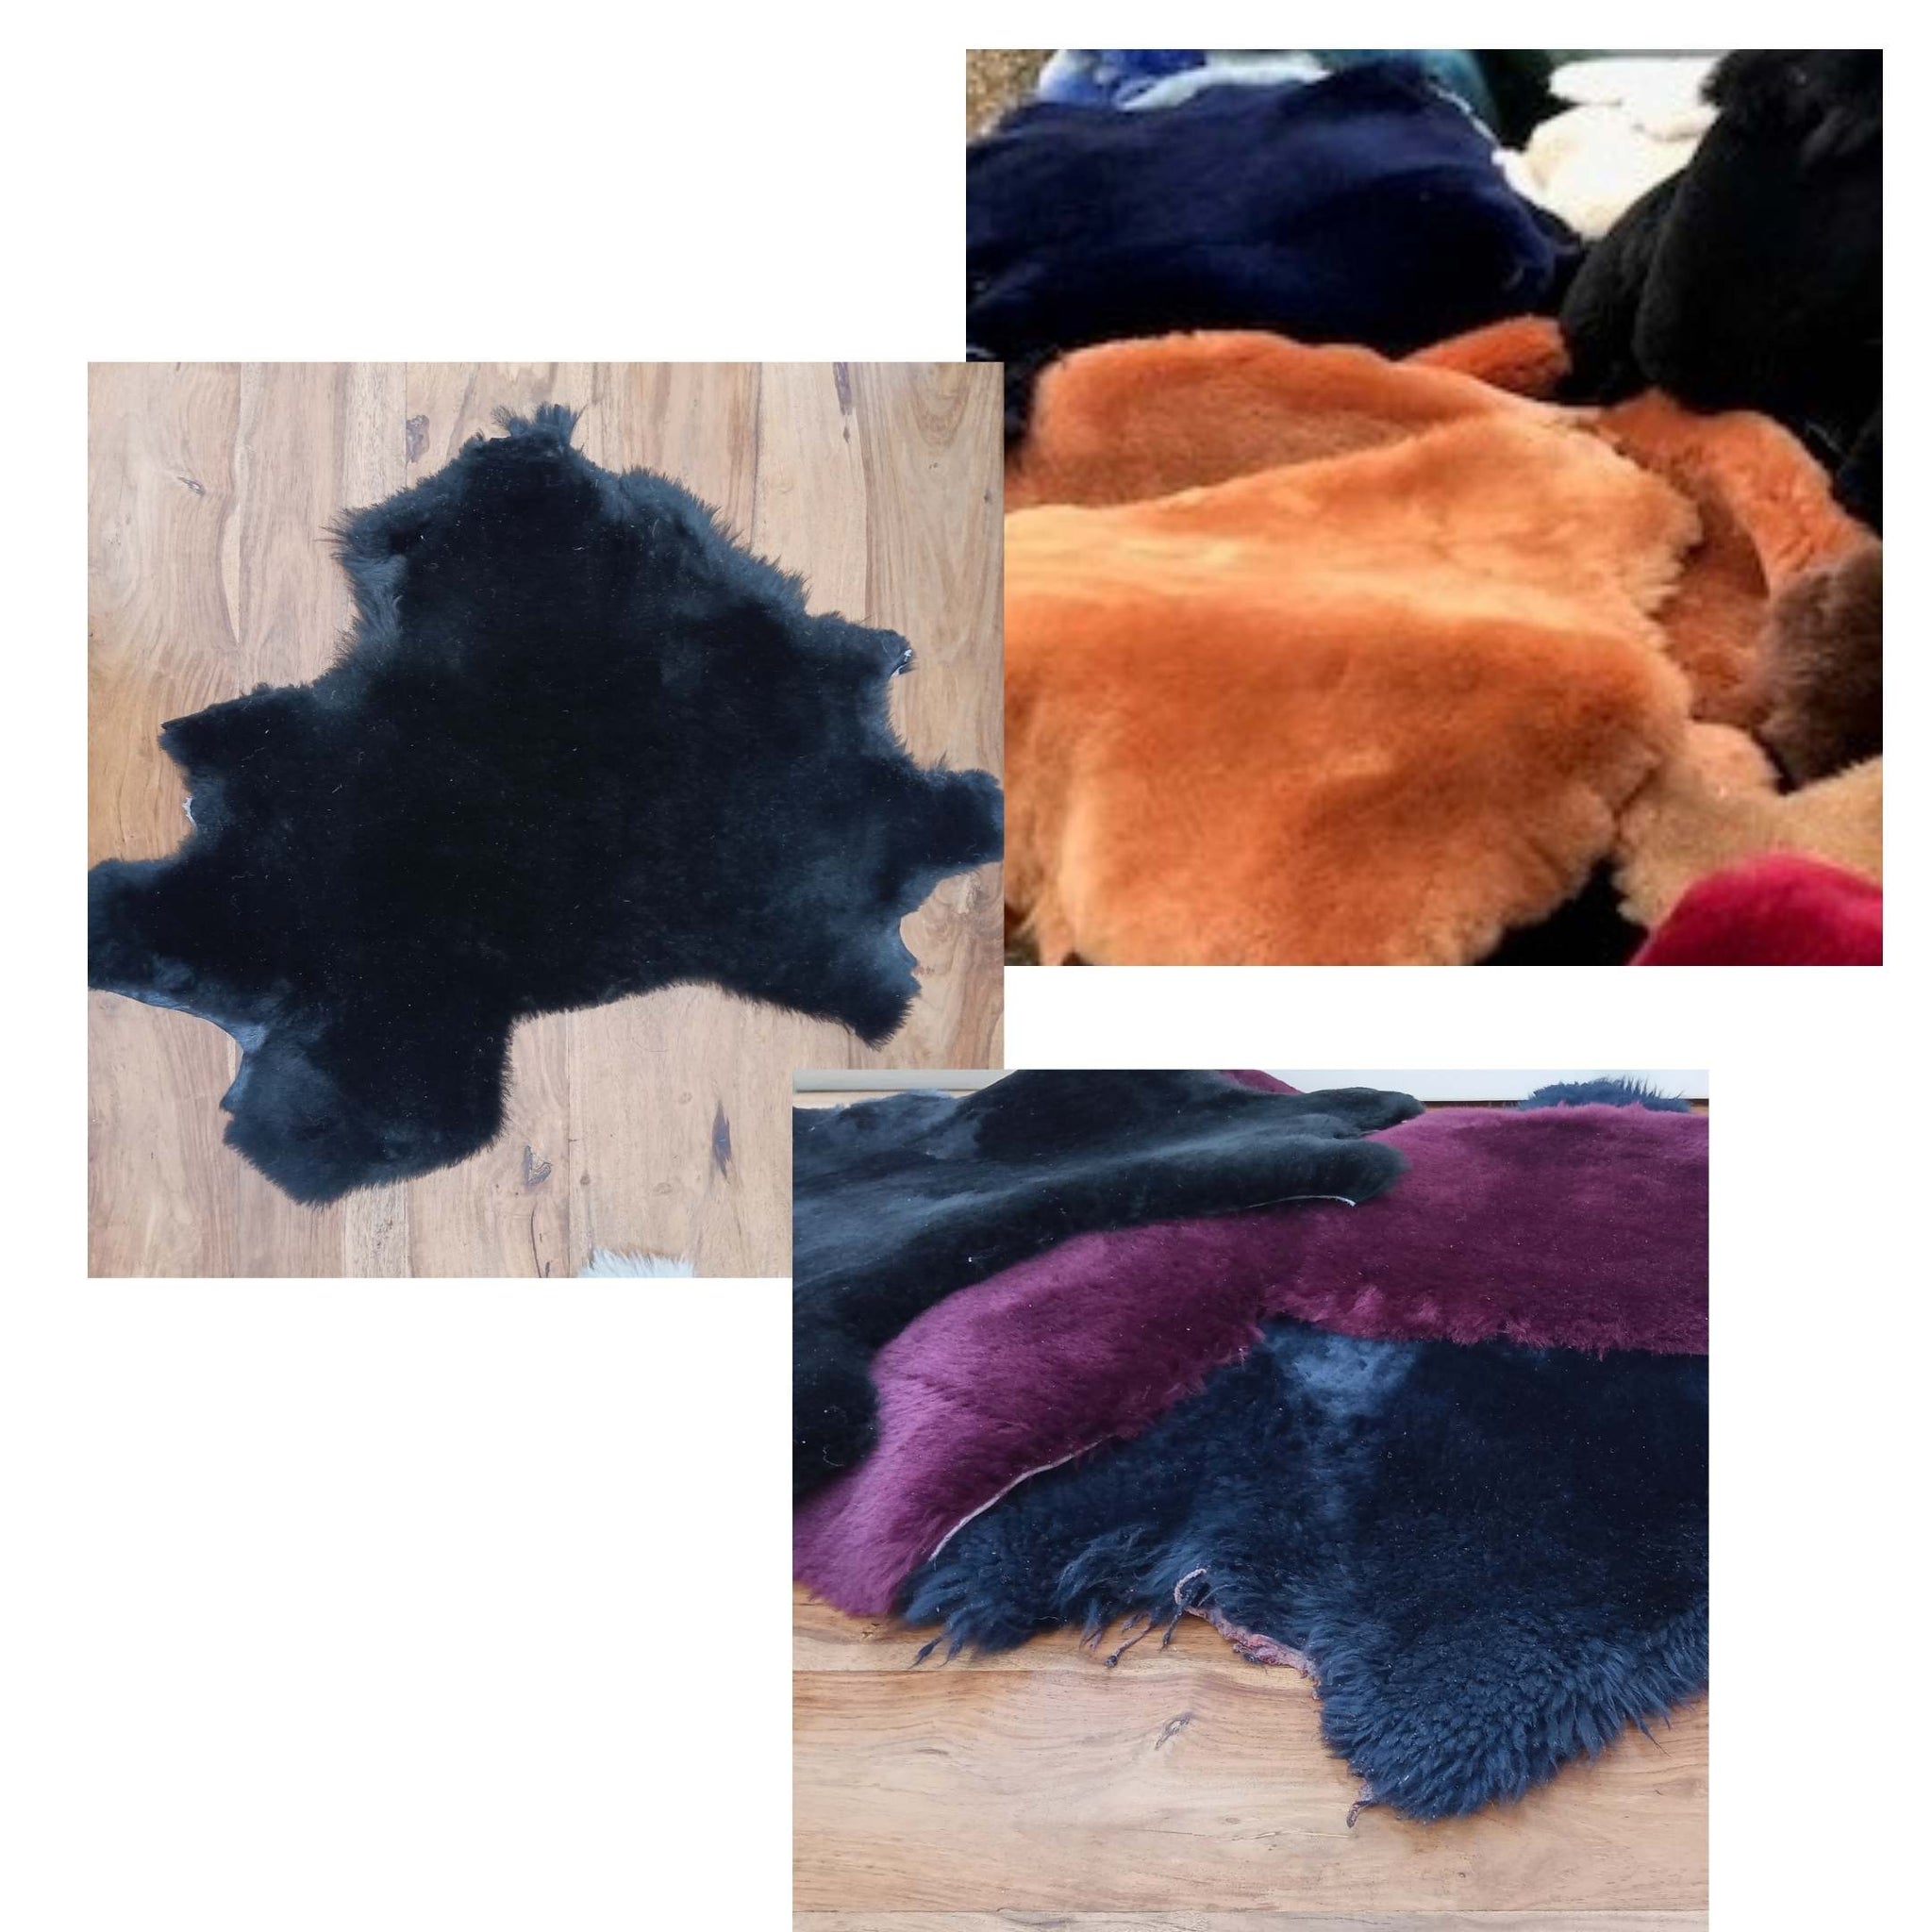 remnant peices of wool sheepskin ideal for lining slippers, gloves, or for trim, dog beds and more